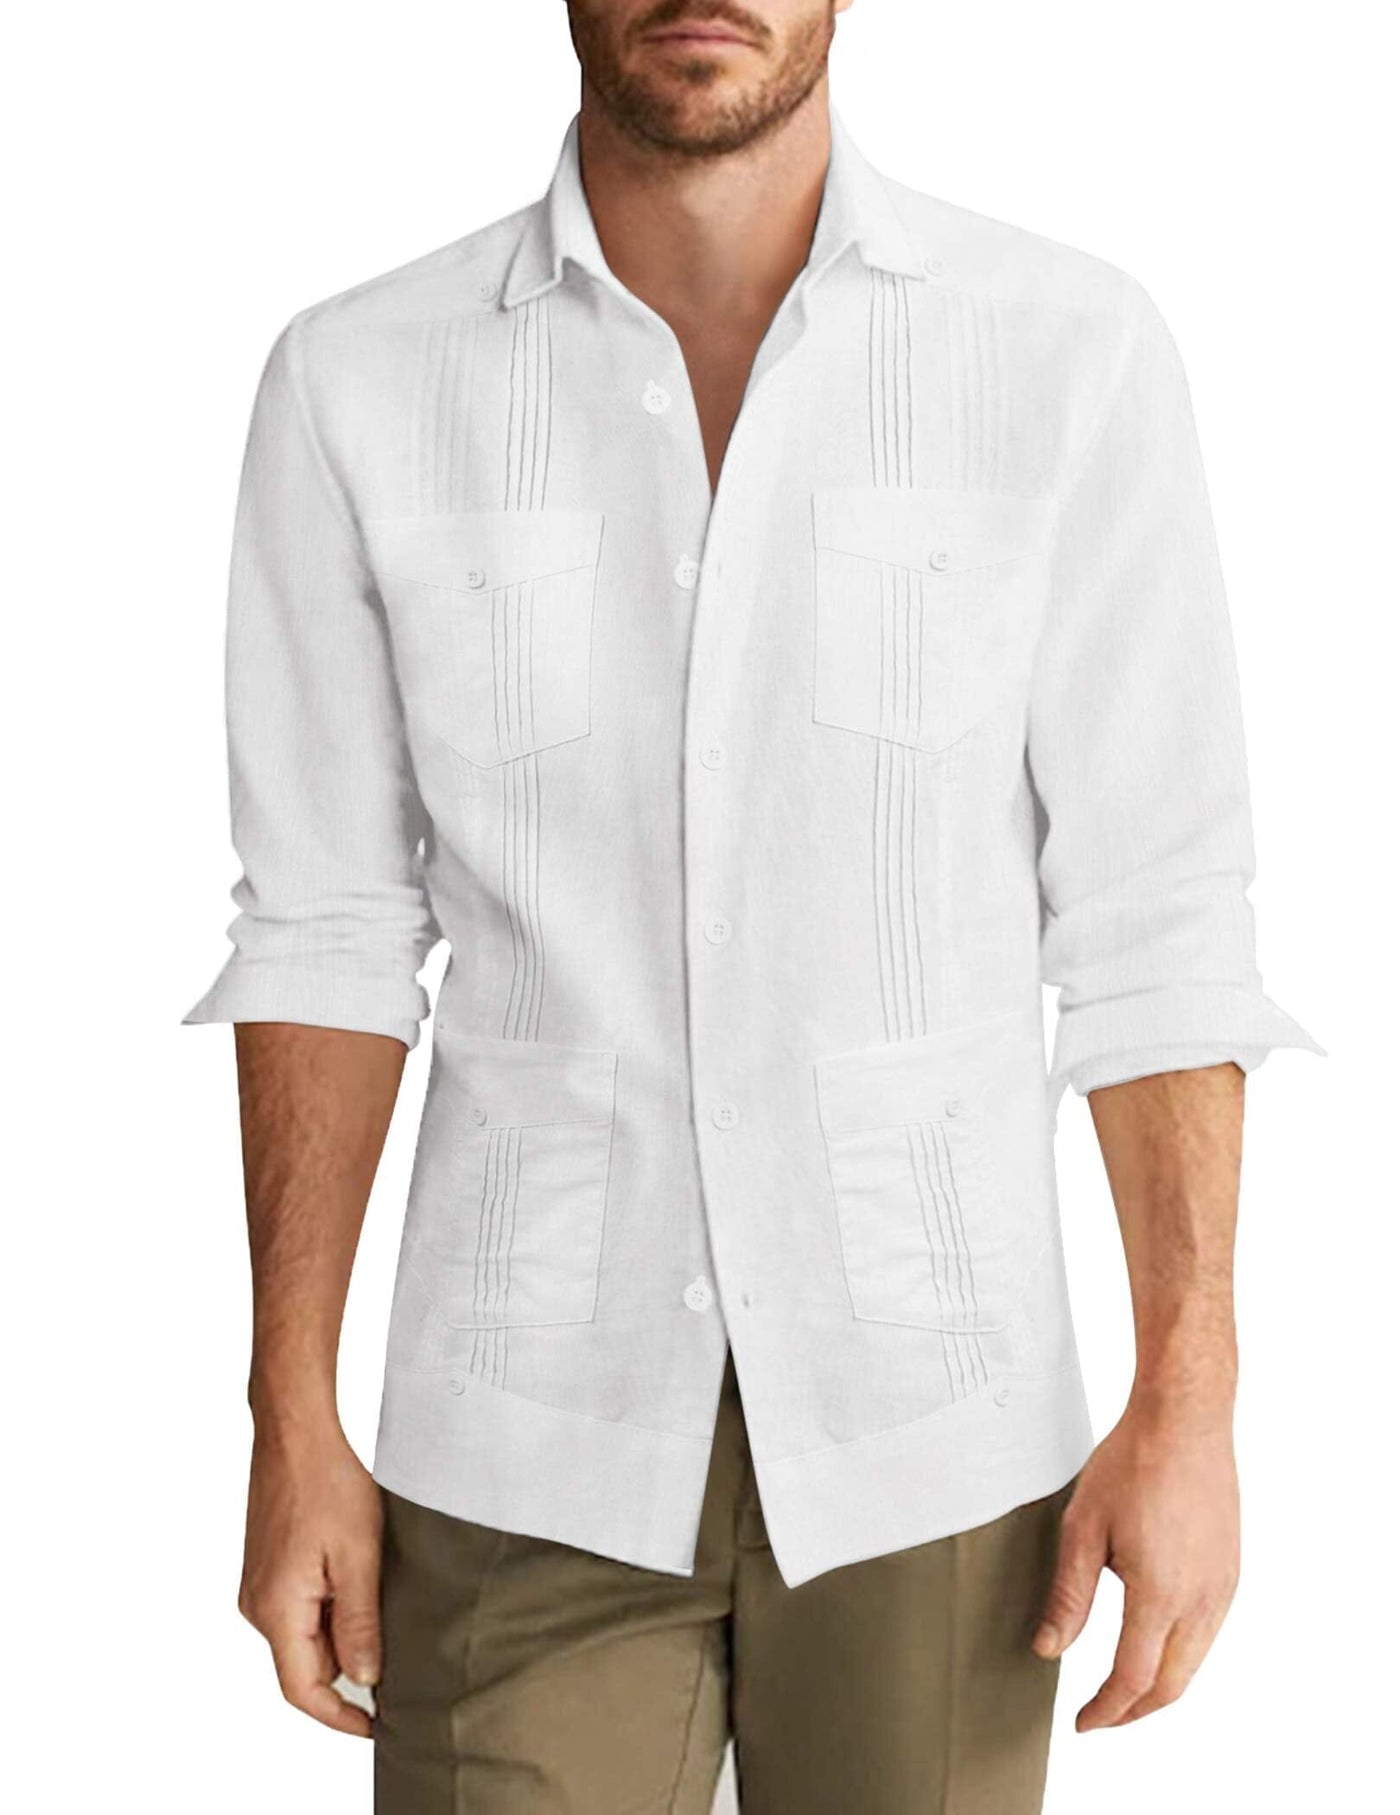 Coofandy Cotton Style Pocket Shirt (US Only) Shirts coofandy White S 